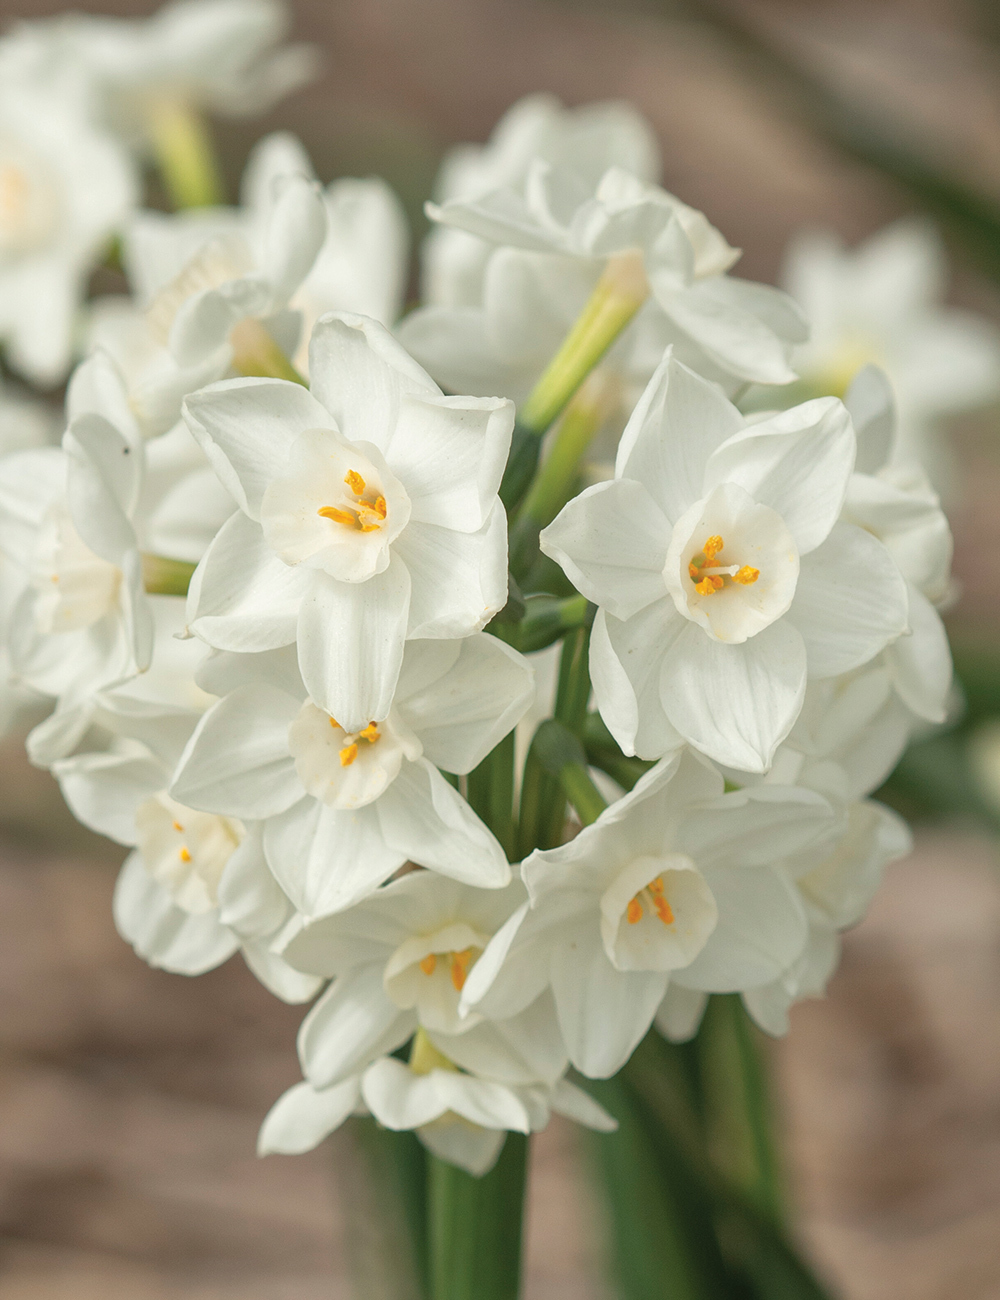 Scented Daffodil 'Polly's Pearl'